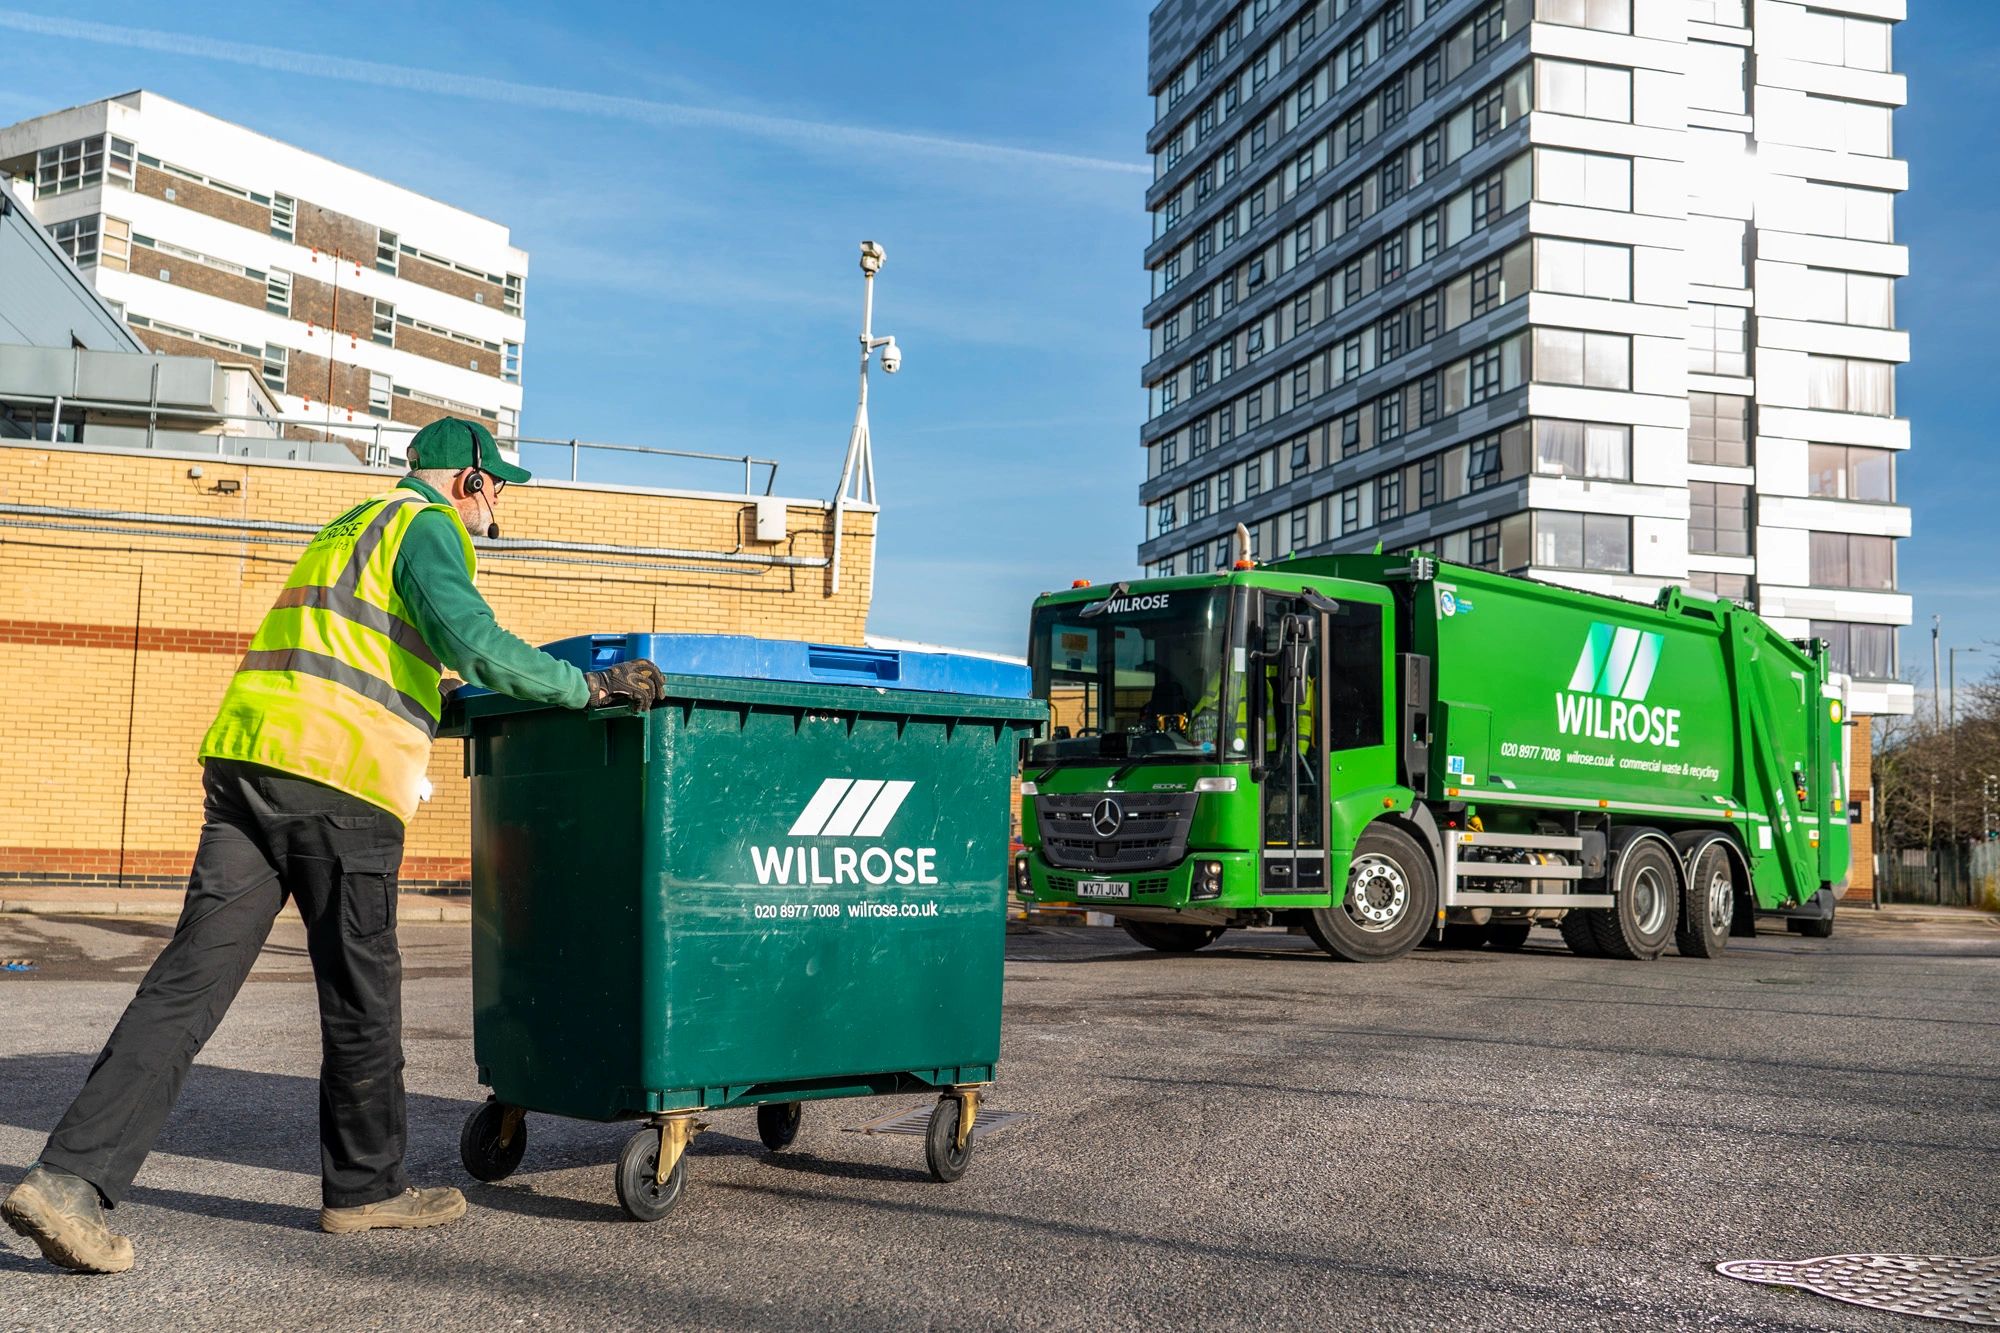 wilrose 1100L wheelie bin being moved by driver with green dustcart in the background.